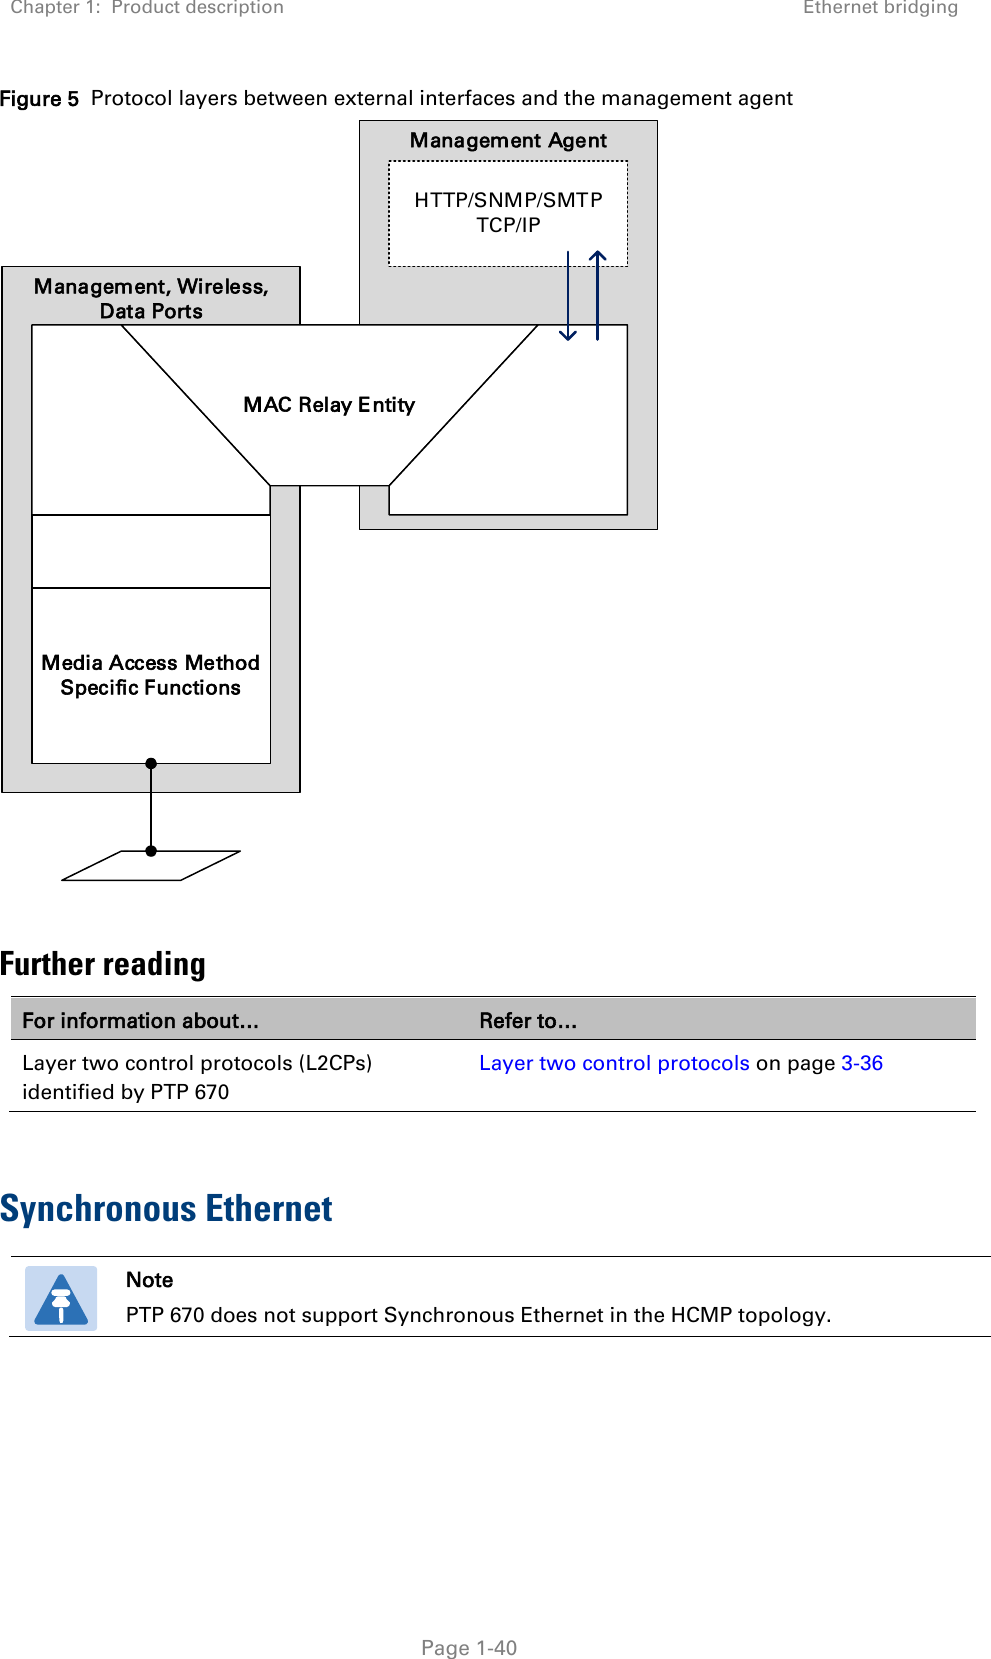 Chapter 1:  Product description Ethernet bridging   Page 1-40 Figure 5  Protocol layers between external interfaces and the management agent Management AgentManagement, Wireless, Data PortsMedia Access Method Specific FunctionsHTTP/SNMP/SMTPTCP/IPMAC Relay Entity  Further reading For information about… Refer to… Layer two control protocols (L2CPs) identified by PTP 670 Layer two control protocols on page 3-36  Synchronous Ethernet  Note PTP 670 does not support Synchronous Ethernet in the HCMP topology.  